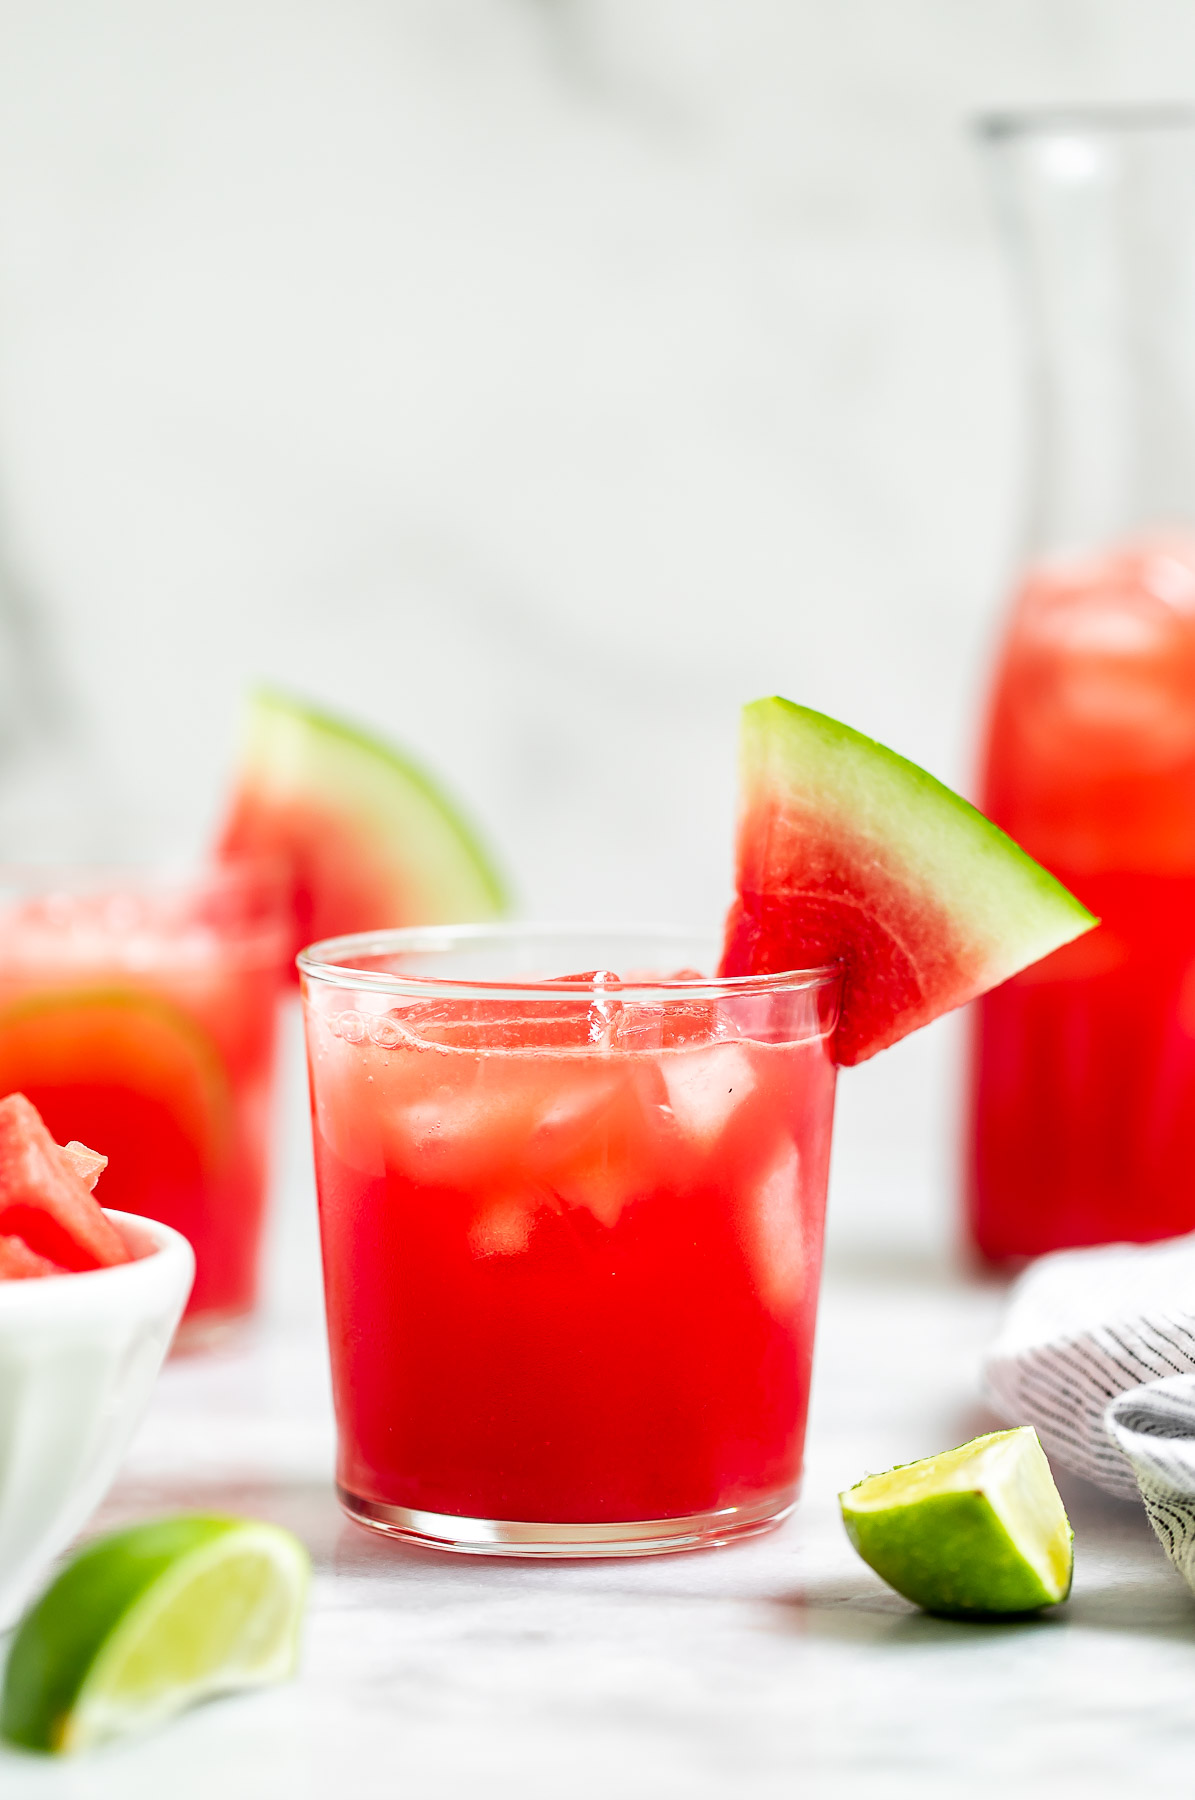 Vodka Cocktail in a glass with ice and watermelon wedges on the side.